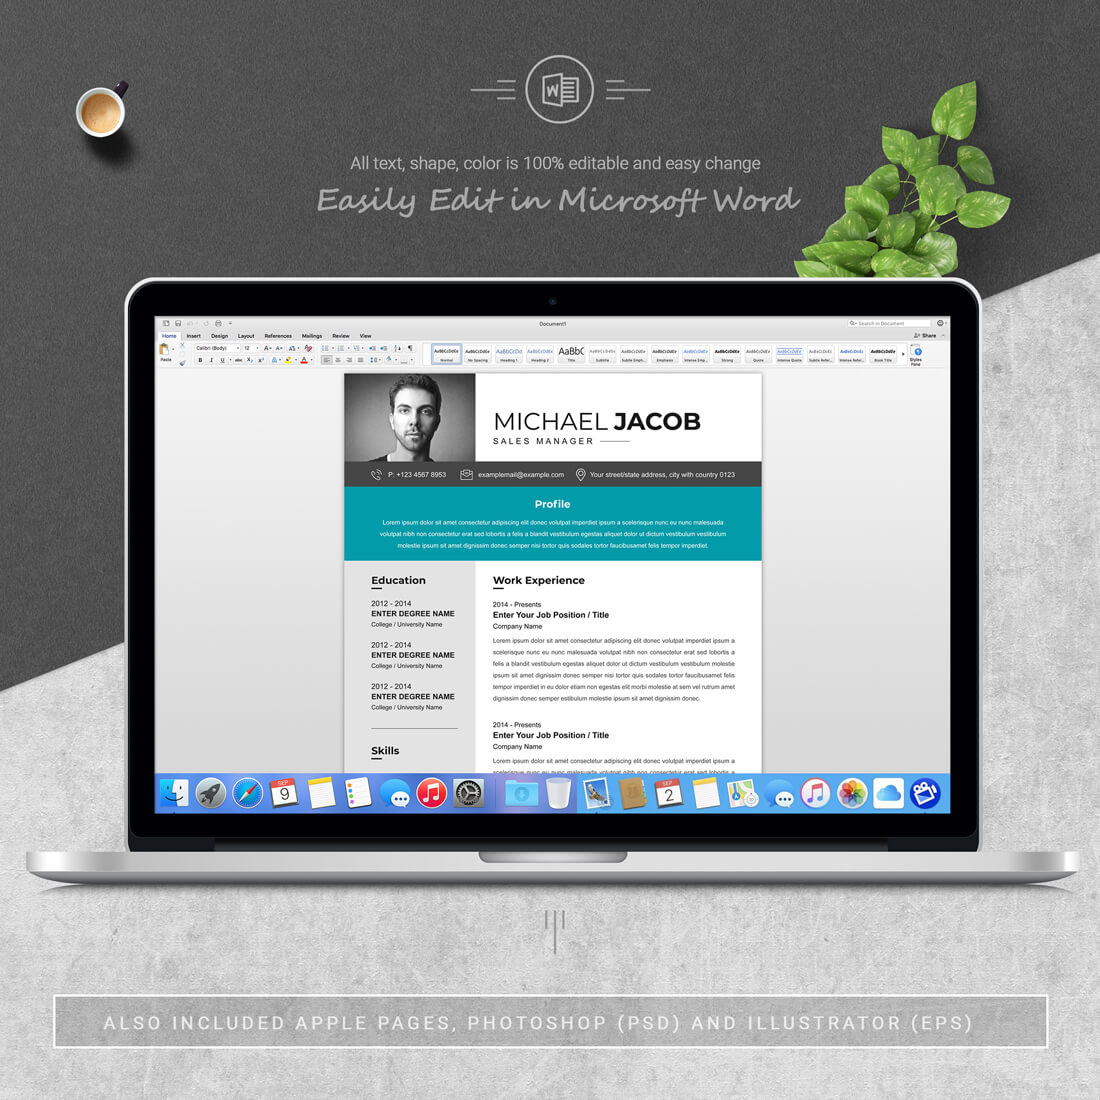 Laptop option of the Sales Manager Curriculum Vitae Template Design.